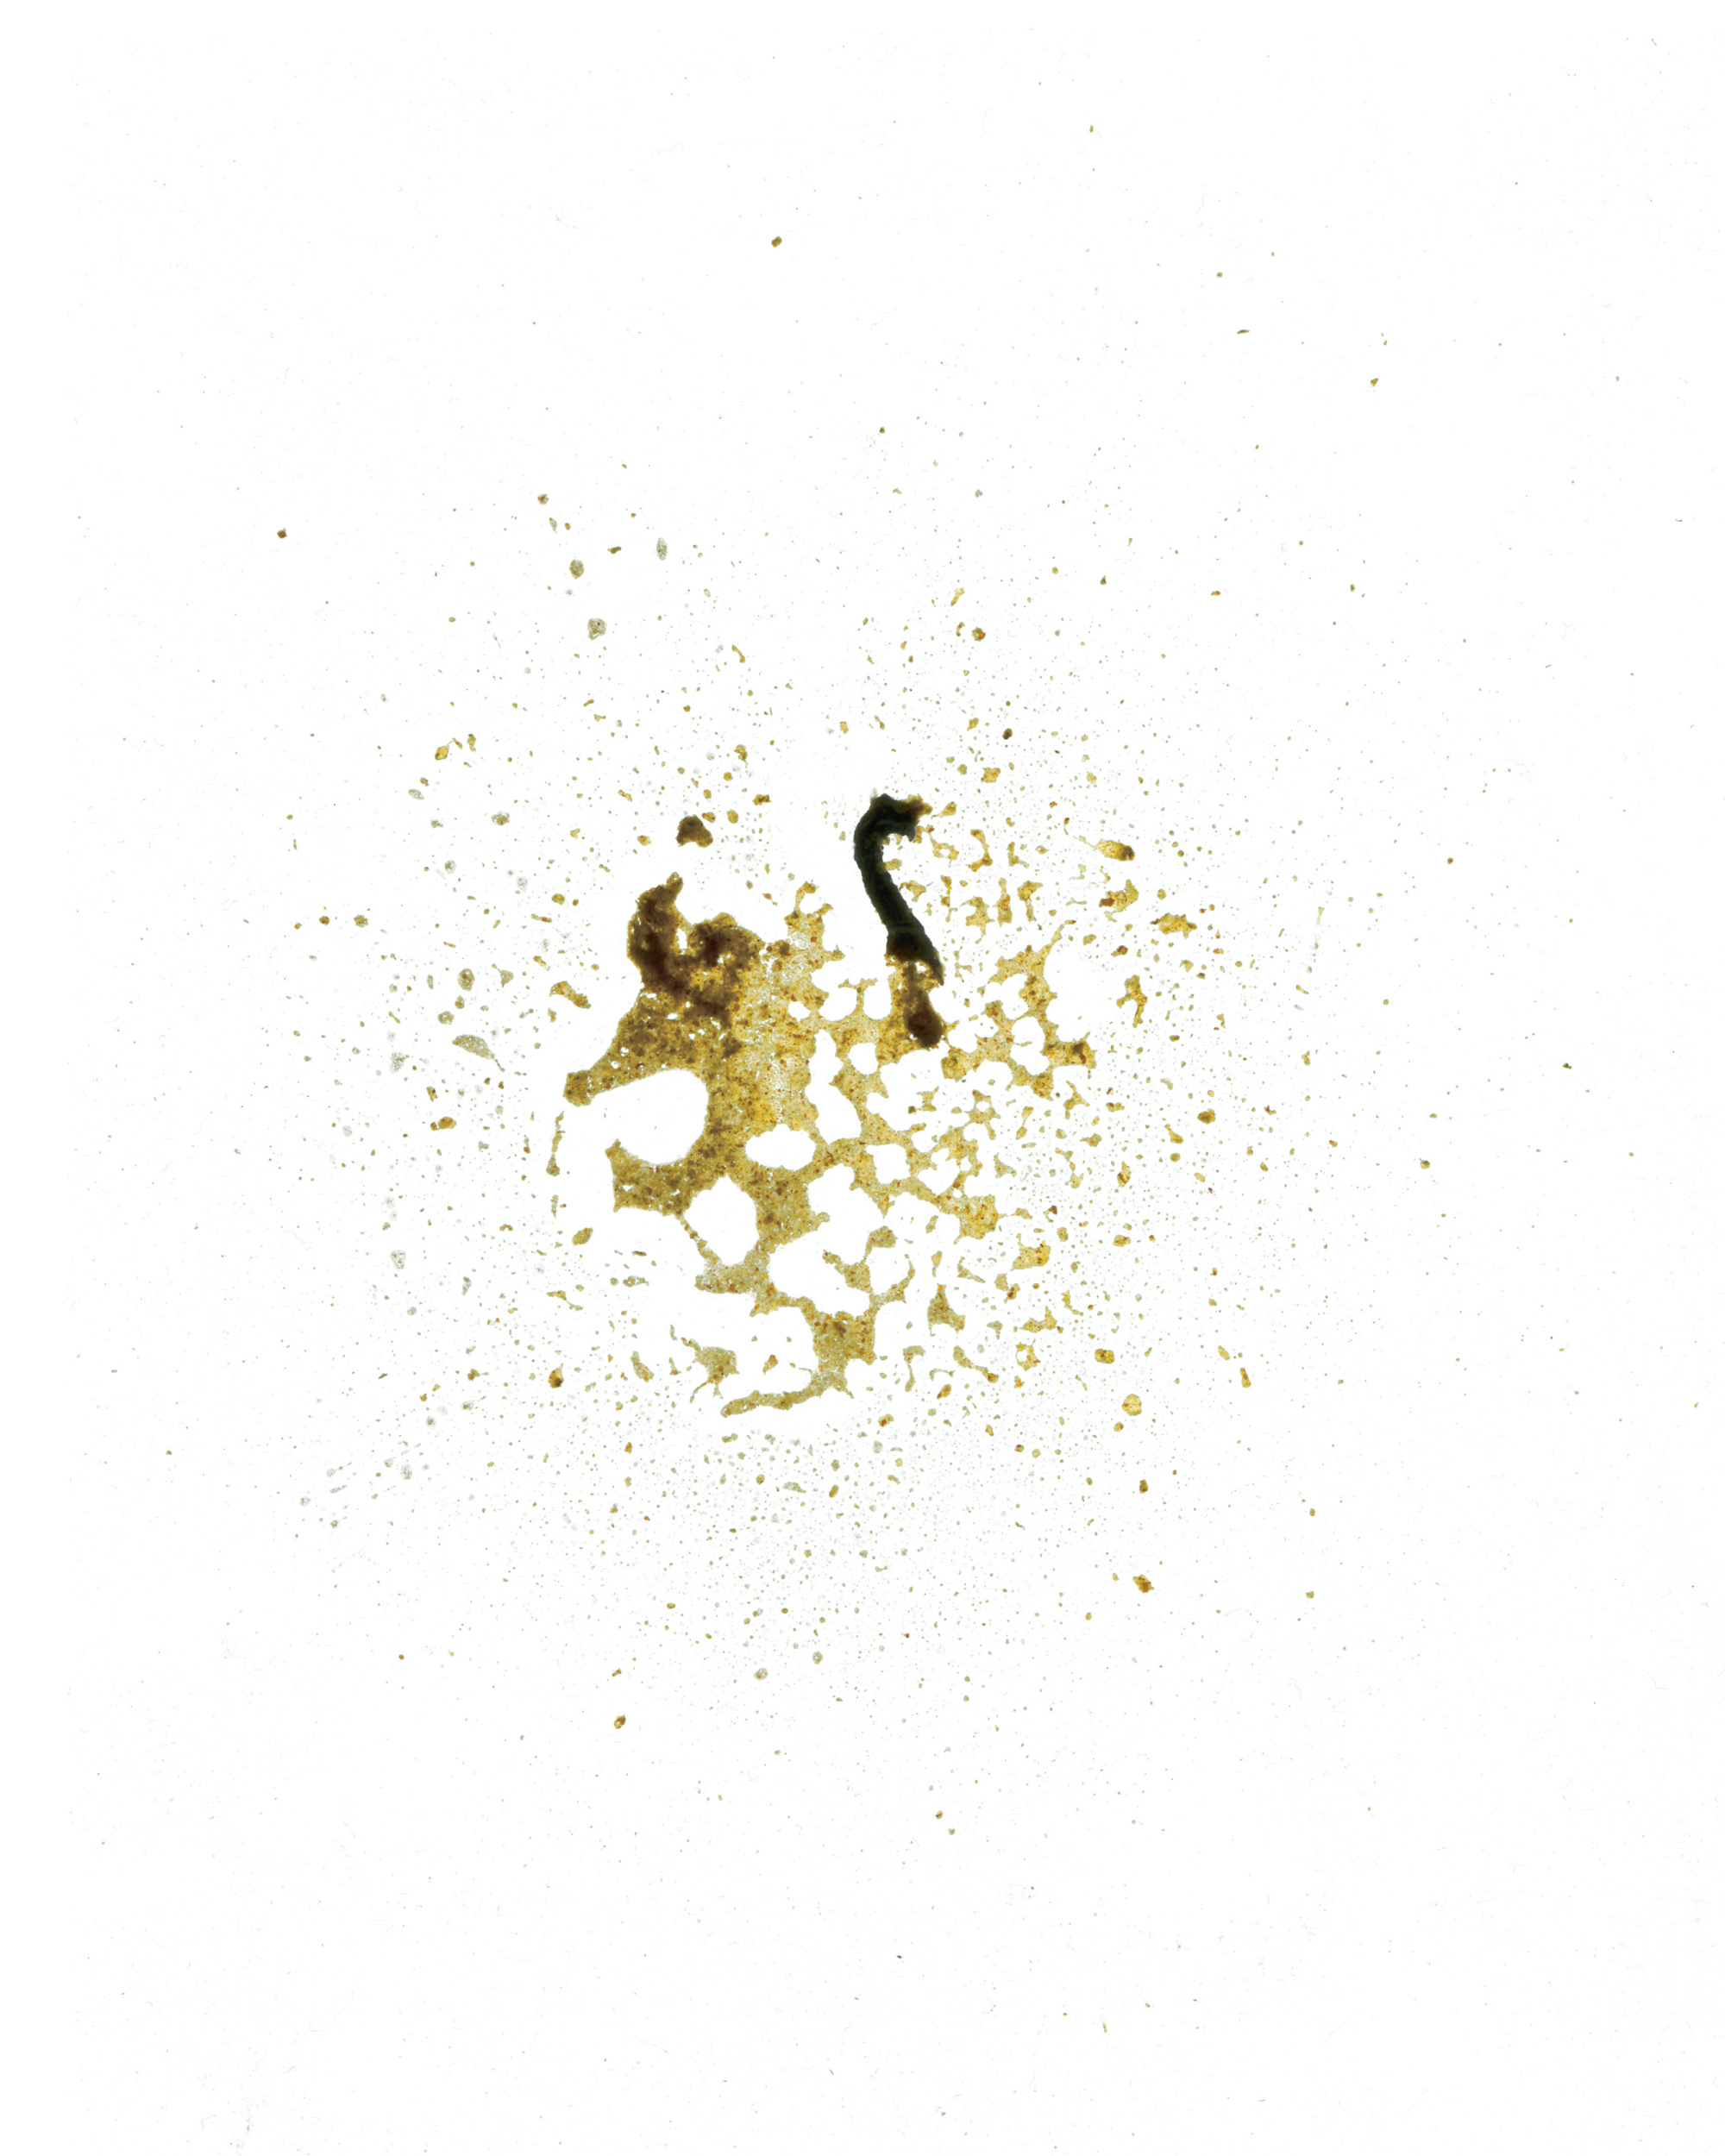 A photograph of a splotch of a sulphur-colored substance.